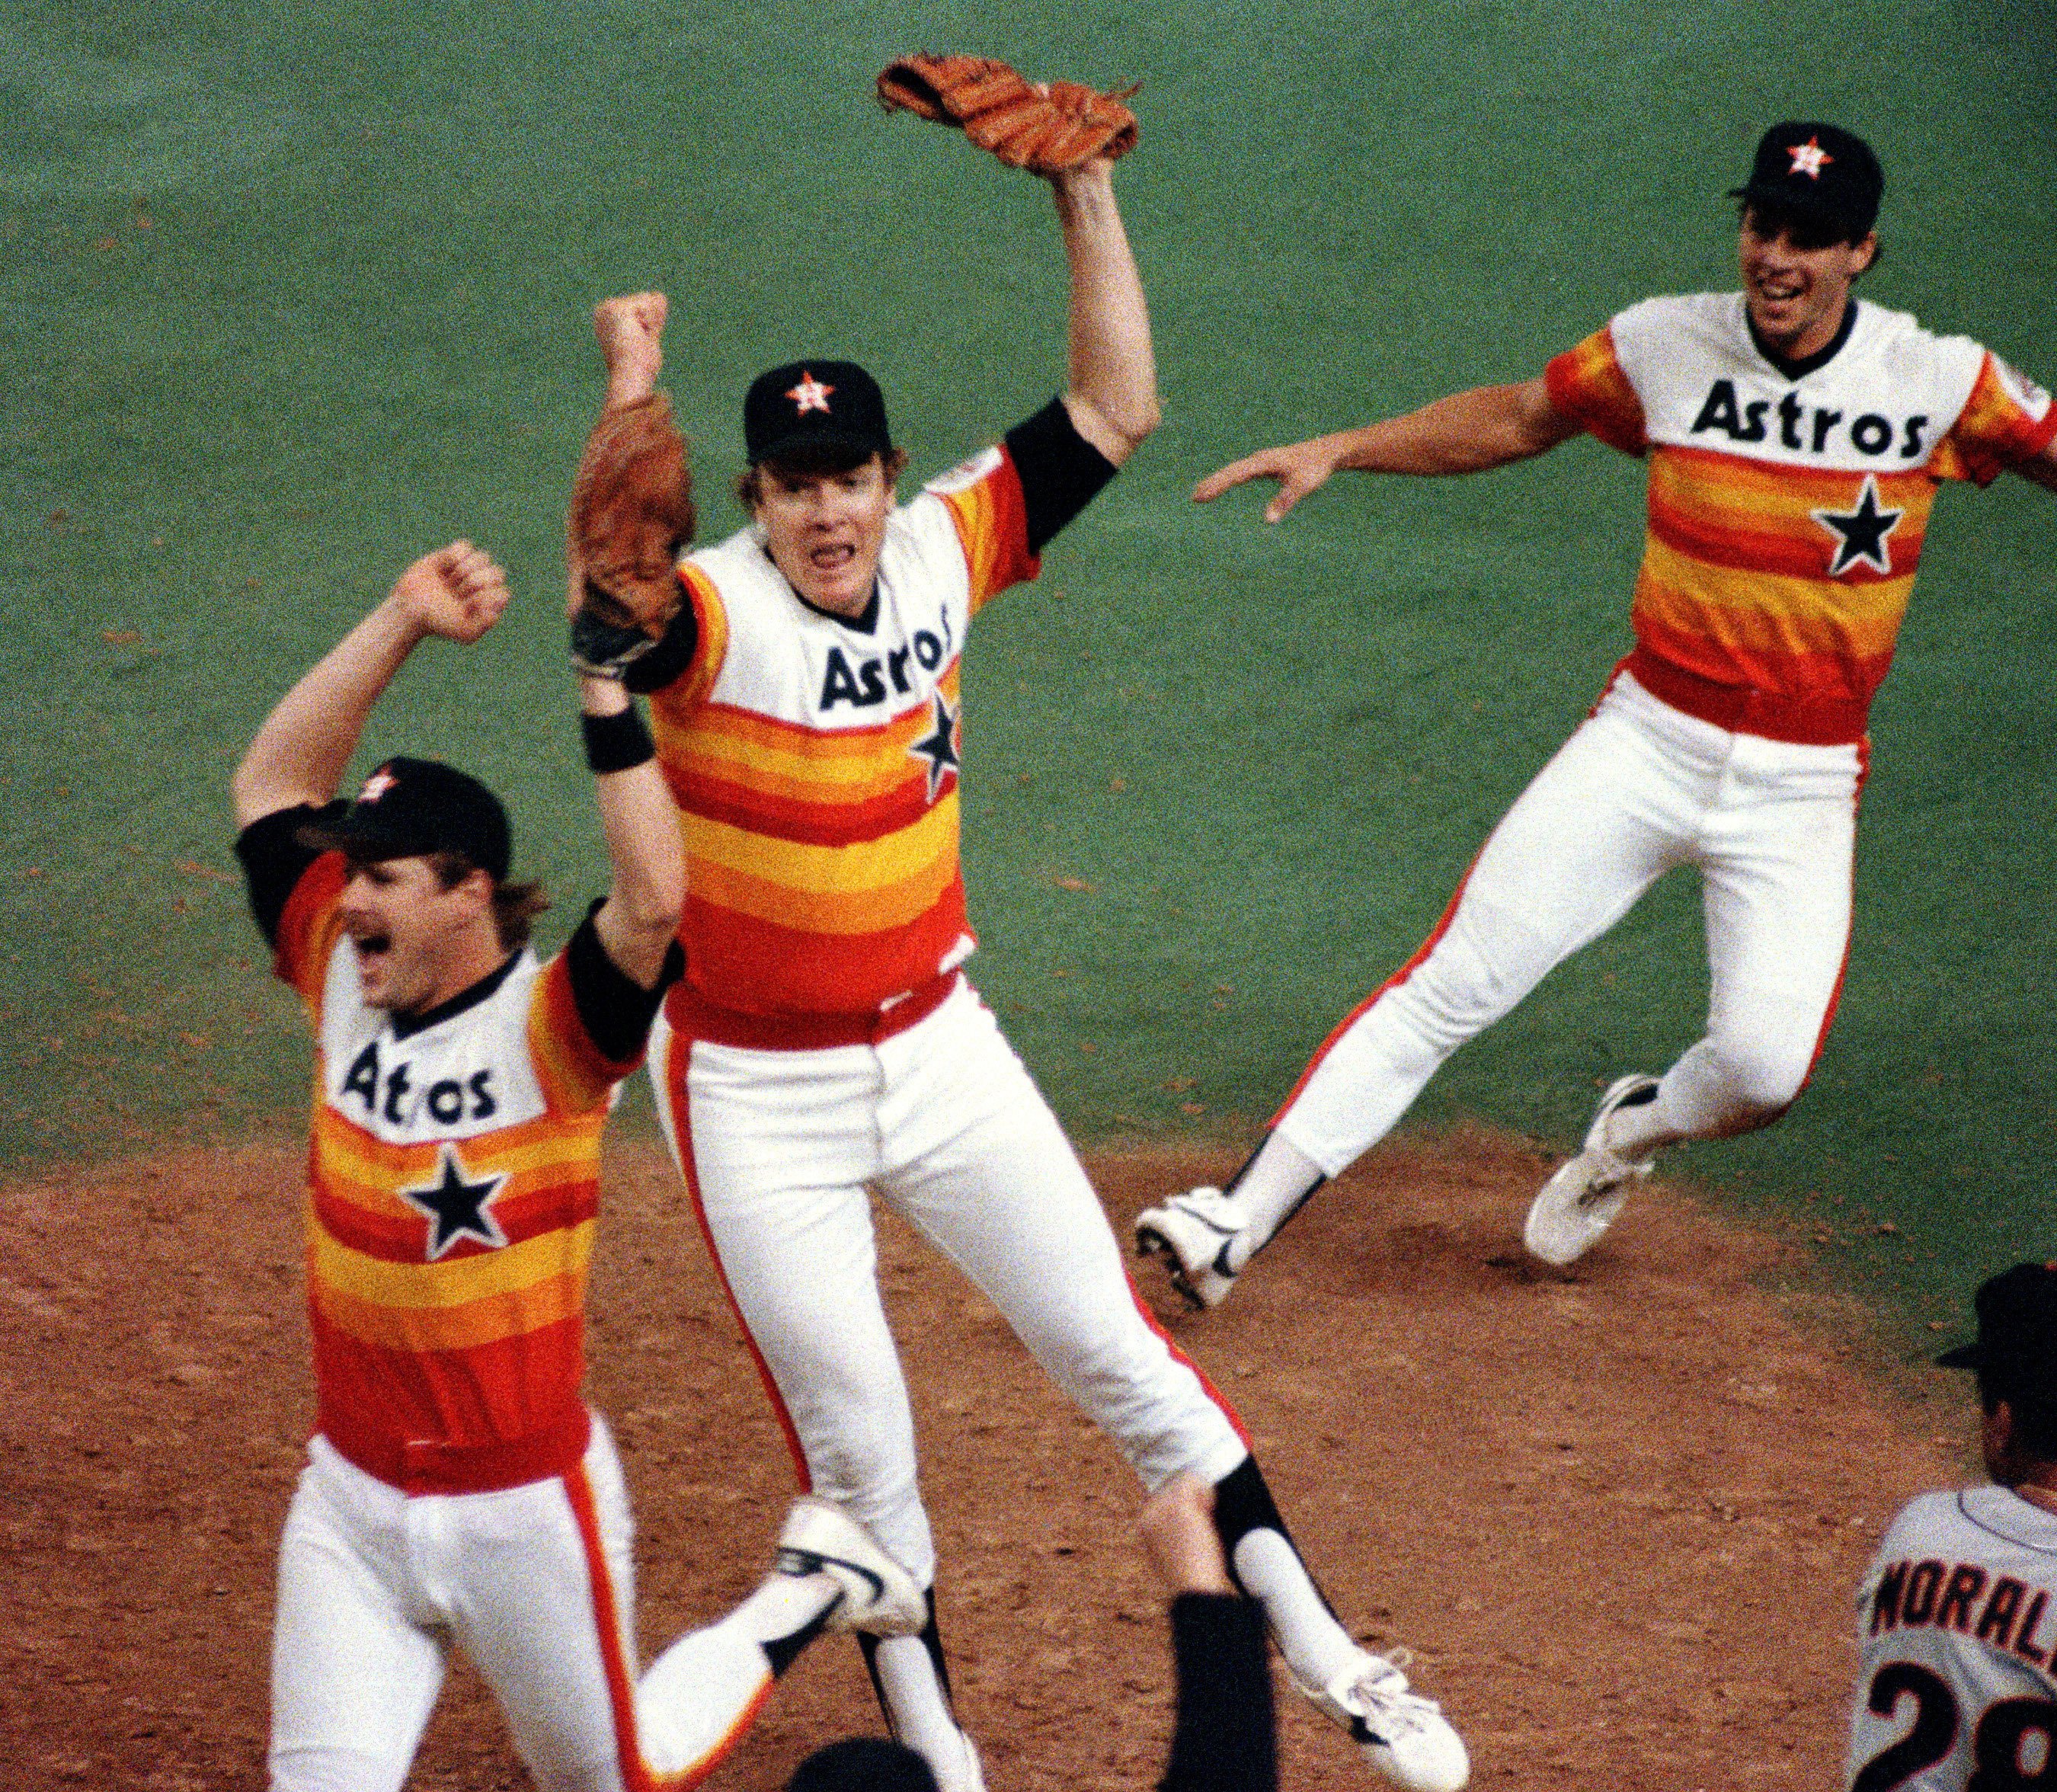 astros classic jersey